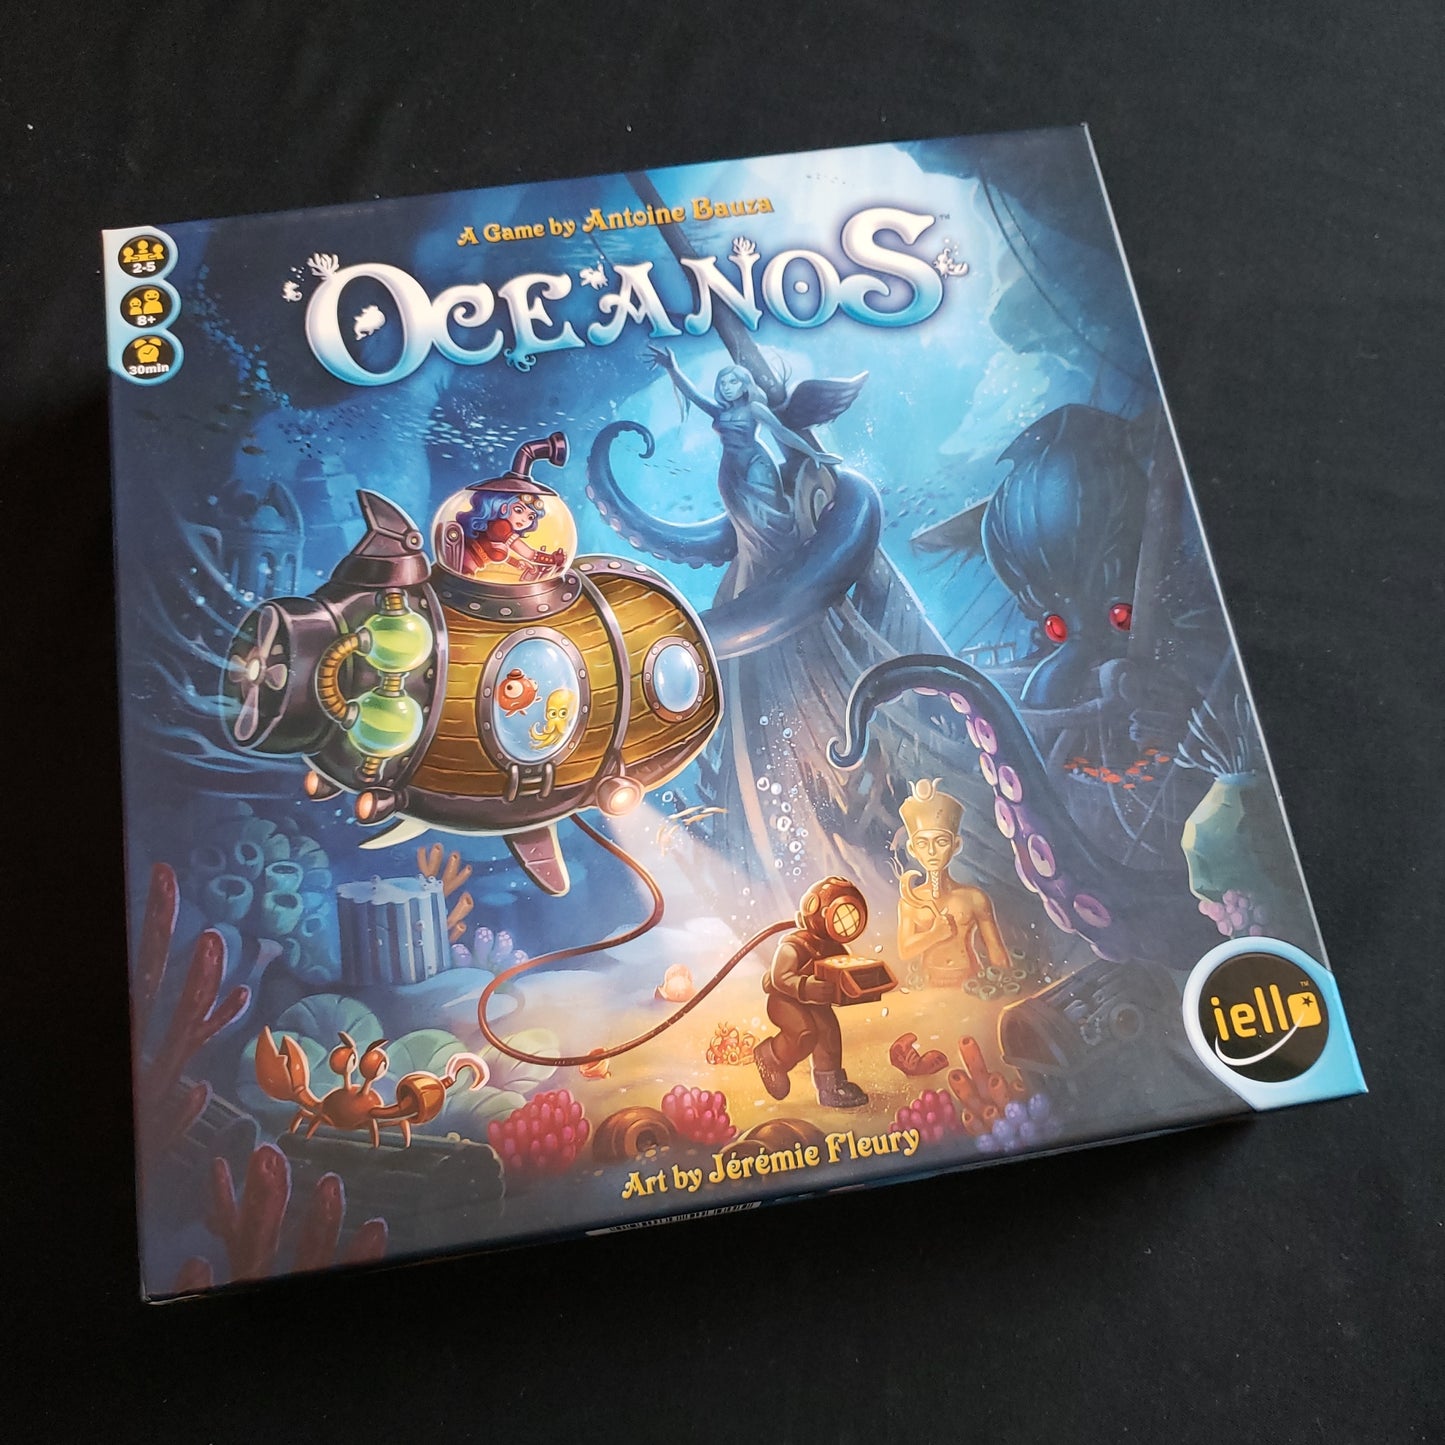 Image shows the front cover of the box of the Oceanos board game